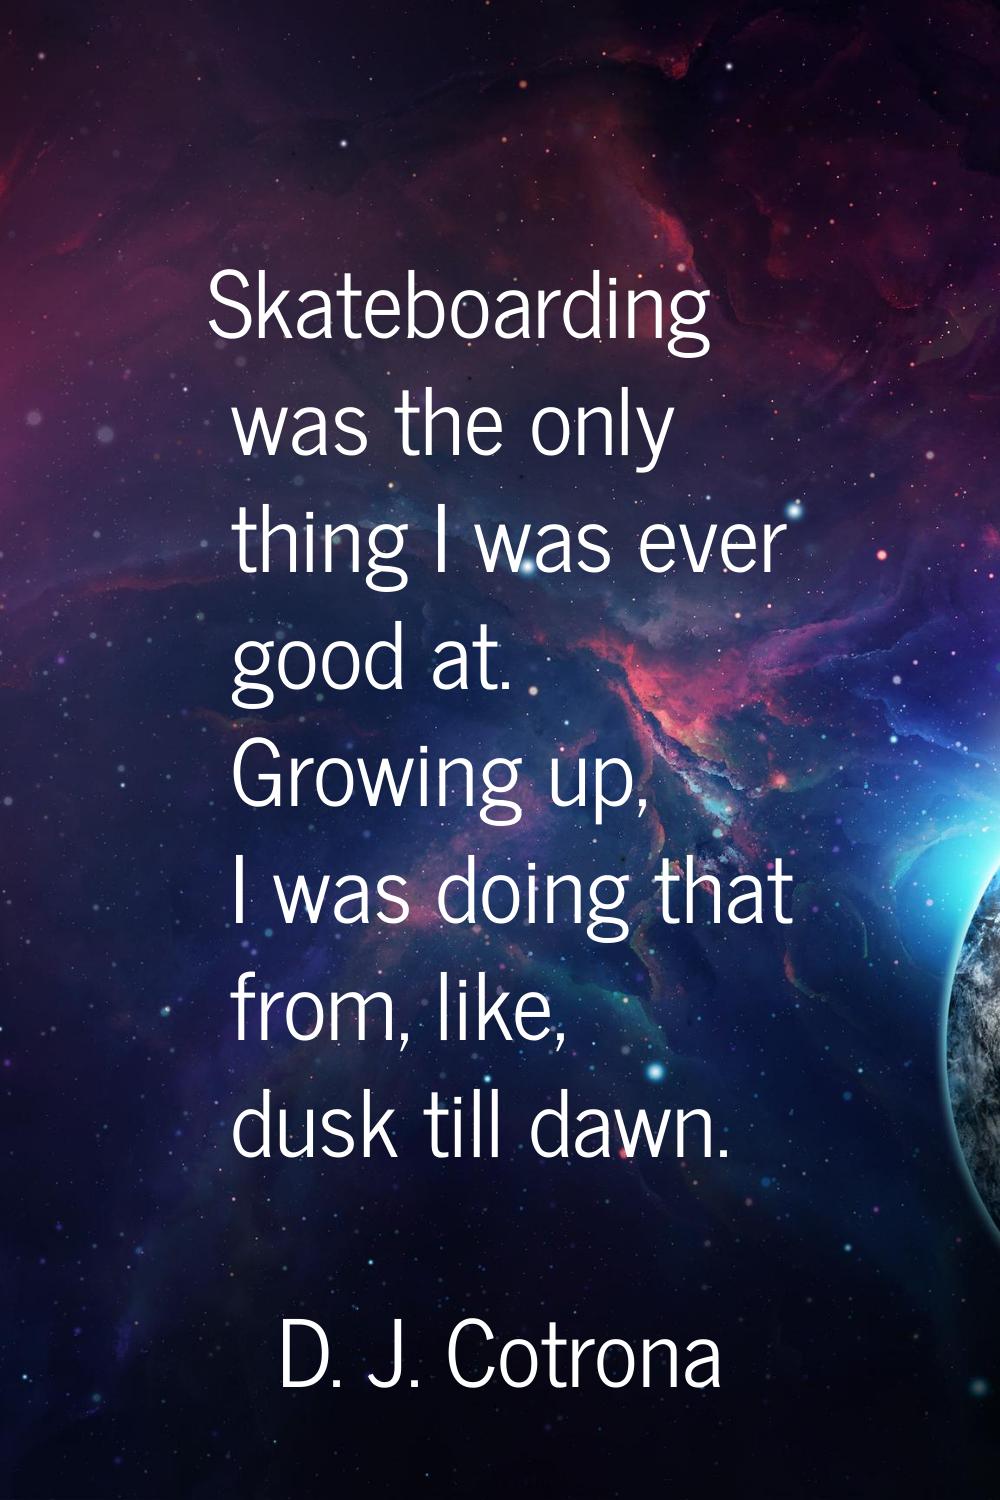 Skateboarding was the only thing I was ever good at. Growing up, I was doing that from, like, dusk 